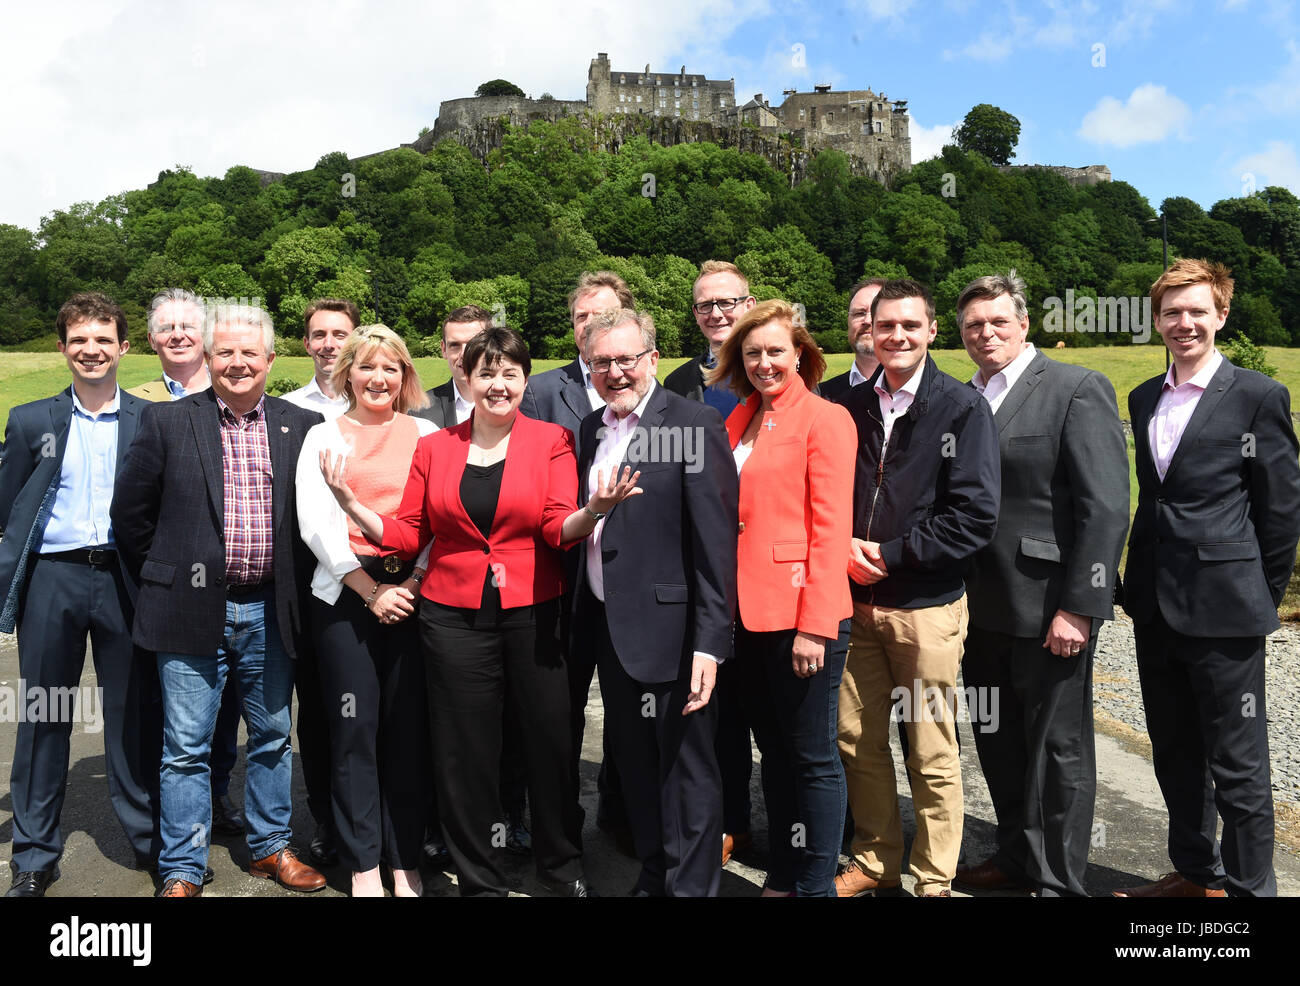 Scottish Conservative leader Ruth Davidson (red jacket) at a photo call with the party's newly-elected members of parliament in front of Stirling Castle. Left to right: Andrew Bowie MP, Colin Clark MP, Bill Grant MP, Luke Graham MP, Kirstene Hair MP, Douglas Ross MP, Ruth Davidson, Alister Jack MP, David Mundell MP, John Lamont MP, Rachael Hamilton MSP, David Duguid MP, Ross Thomson MP, Stephen Kerr MP, Paul Masterton MP. Stock Photo